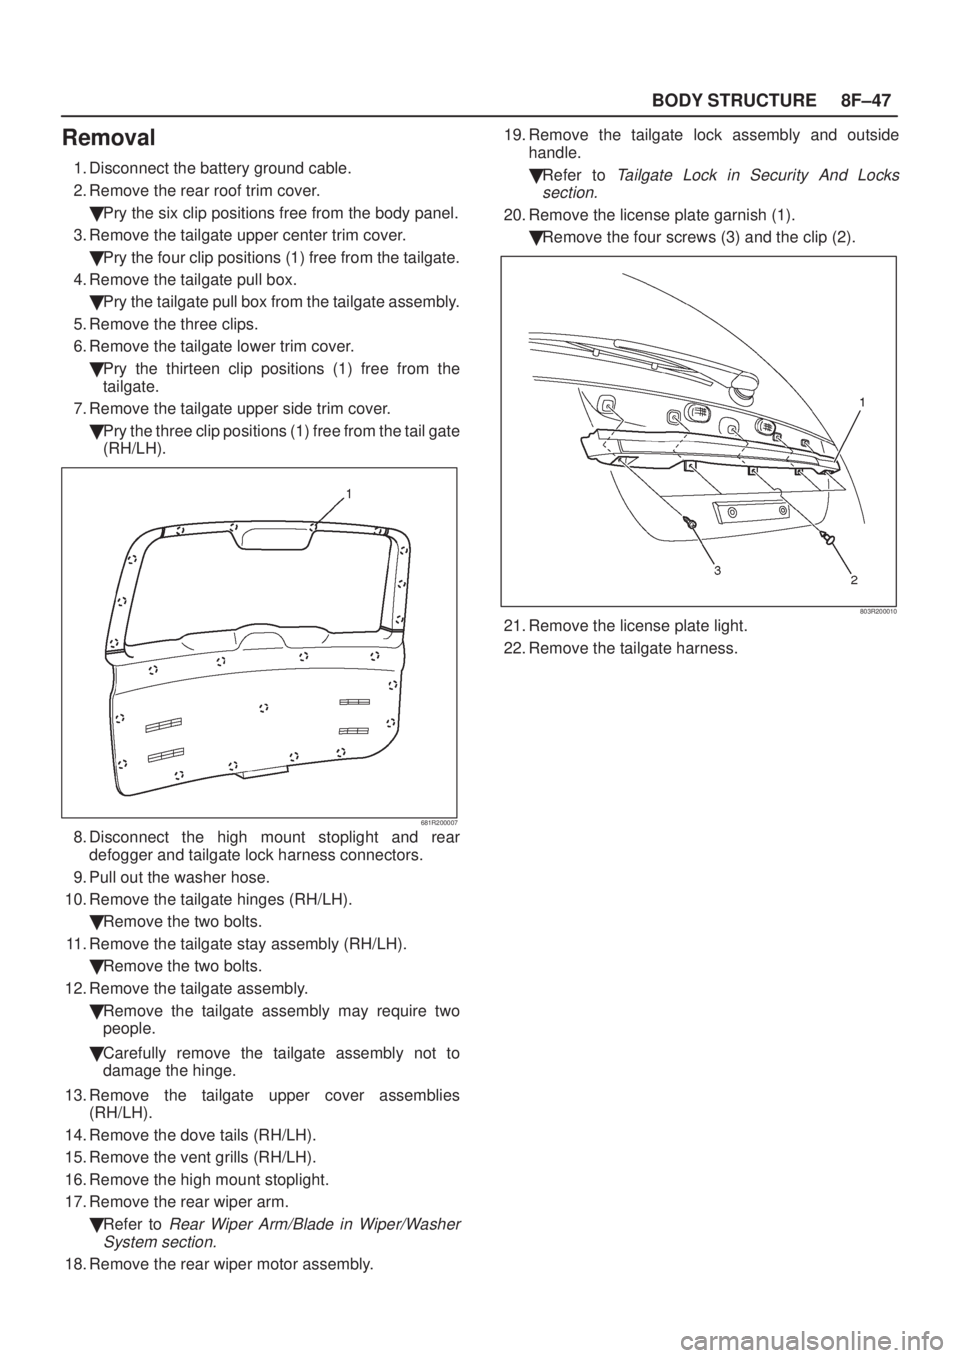 ISUZU AXIOM 2002  Service Repair Manual 8F±47 BODY STRUCTURE
Removal
1. Disconnect the battery ground cable.
2. Remove the rear roof trim cover.
Pry the six clip positions free from the body panel.
3. Remove the tailgate upper center trim